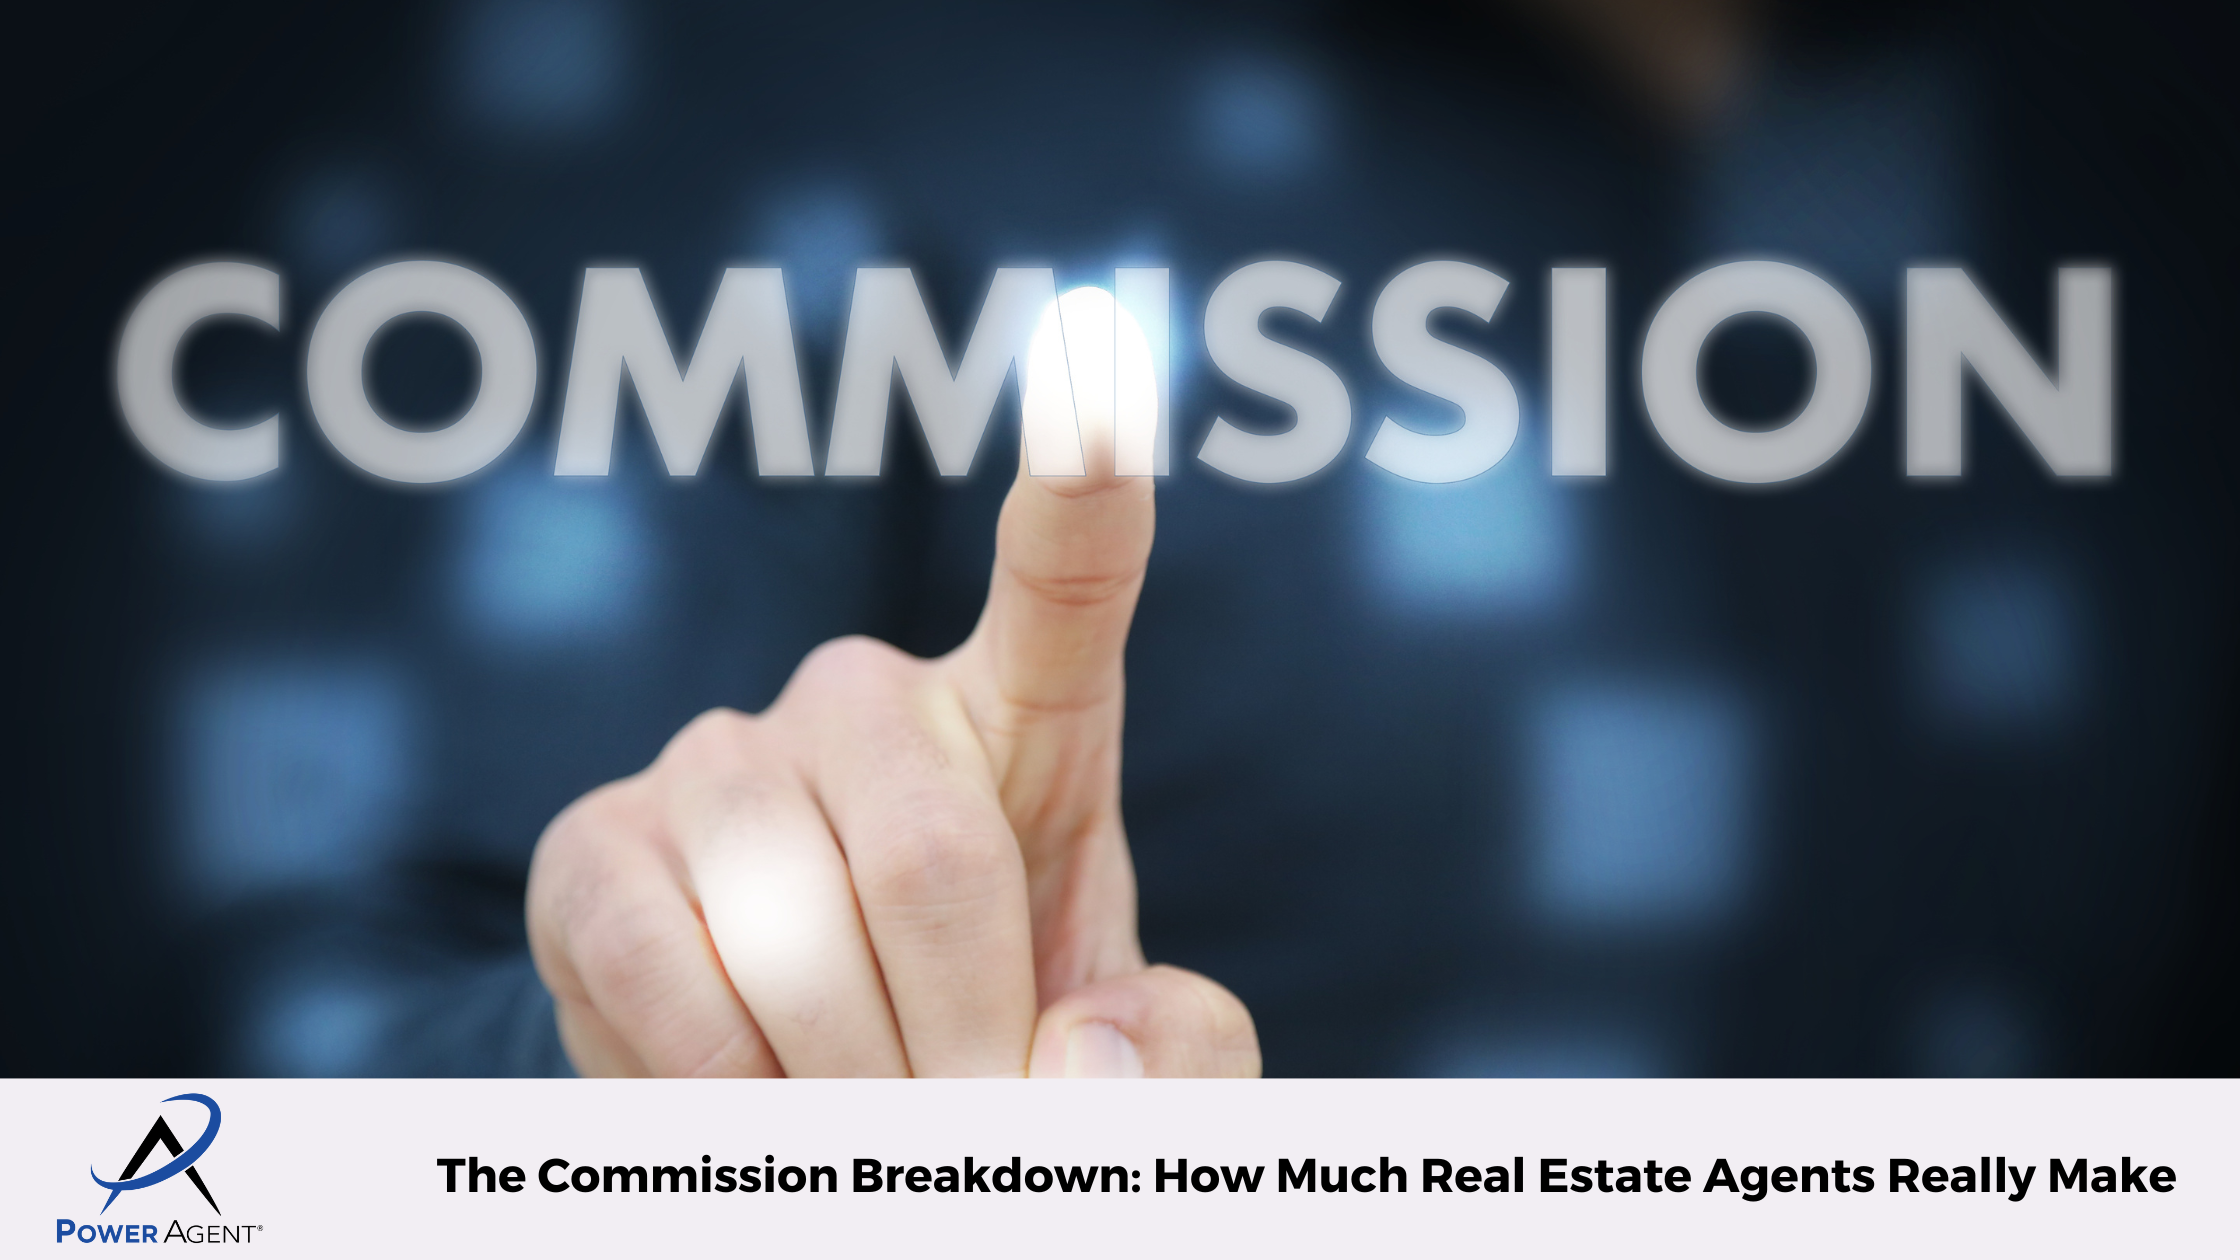 The Commission Breakdown: How Much Real Estate Agents Really Make